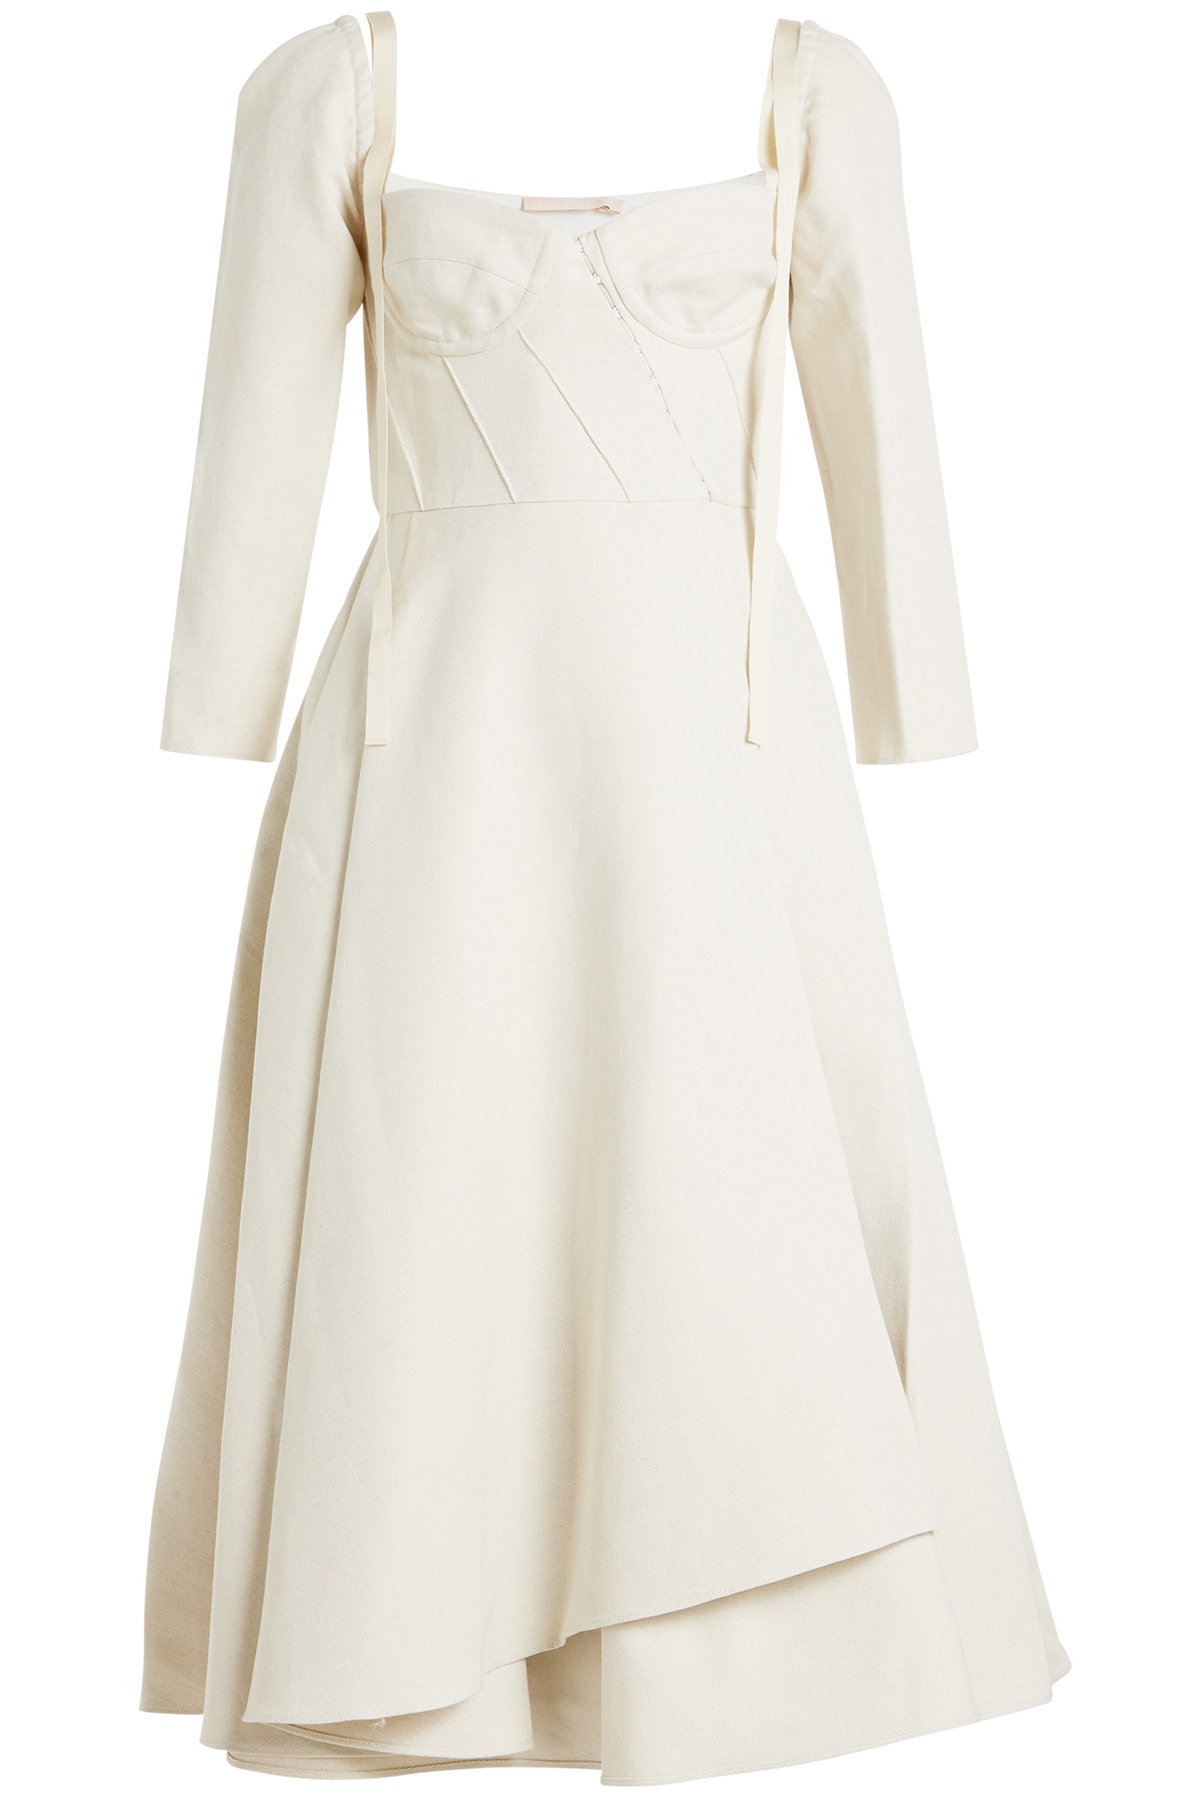 Devin Dress in Linen and Cotton by BROCK COLLECTION